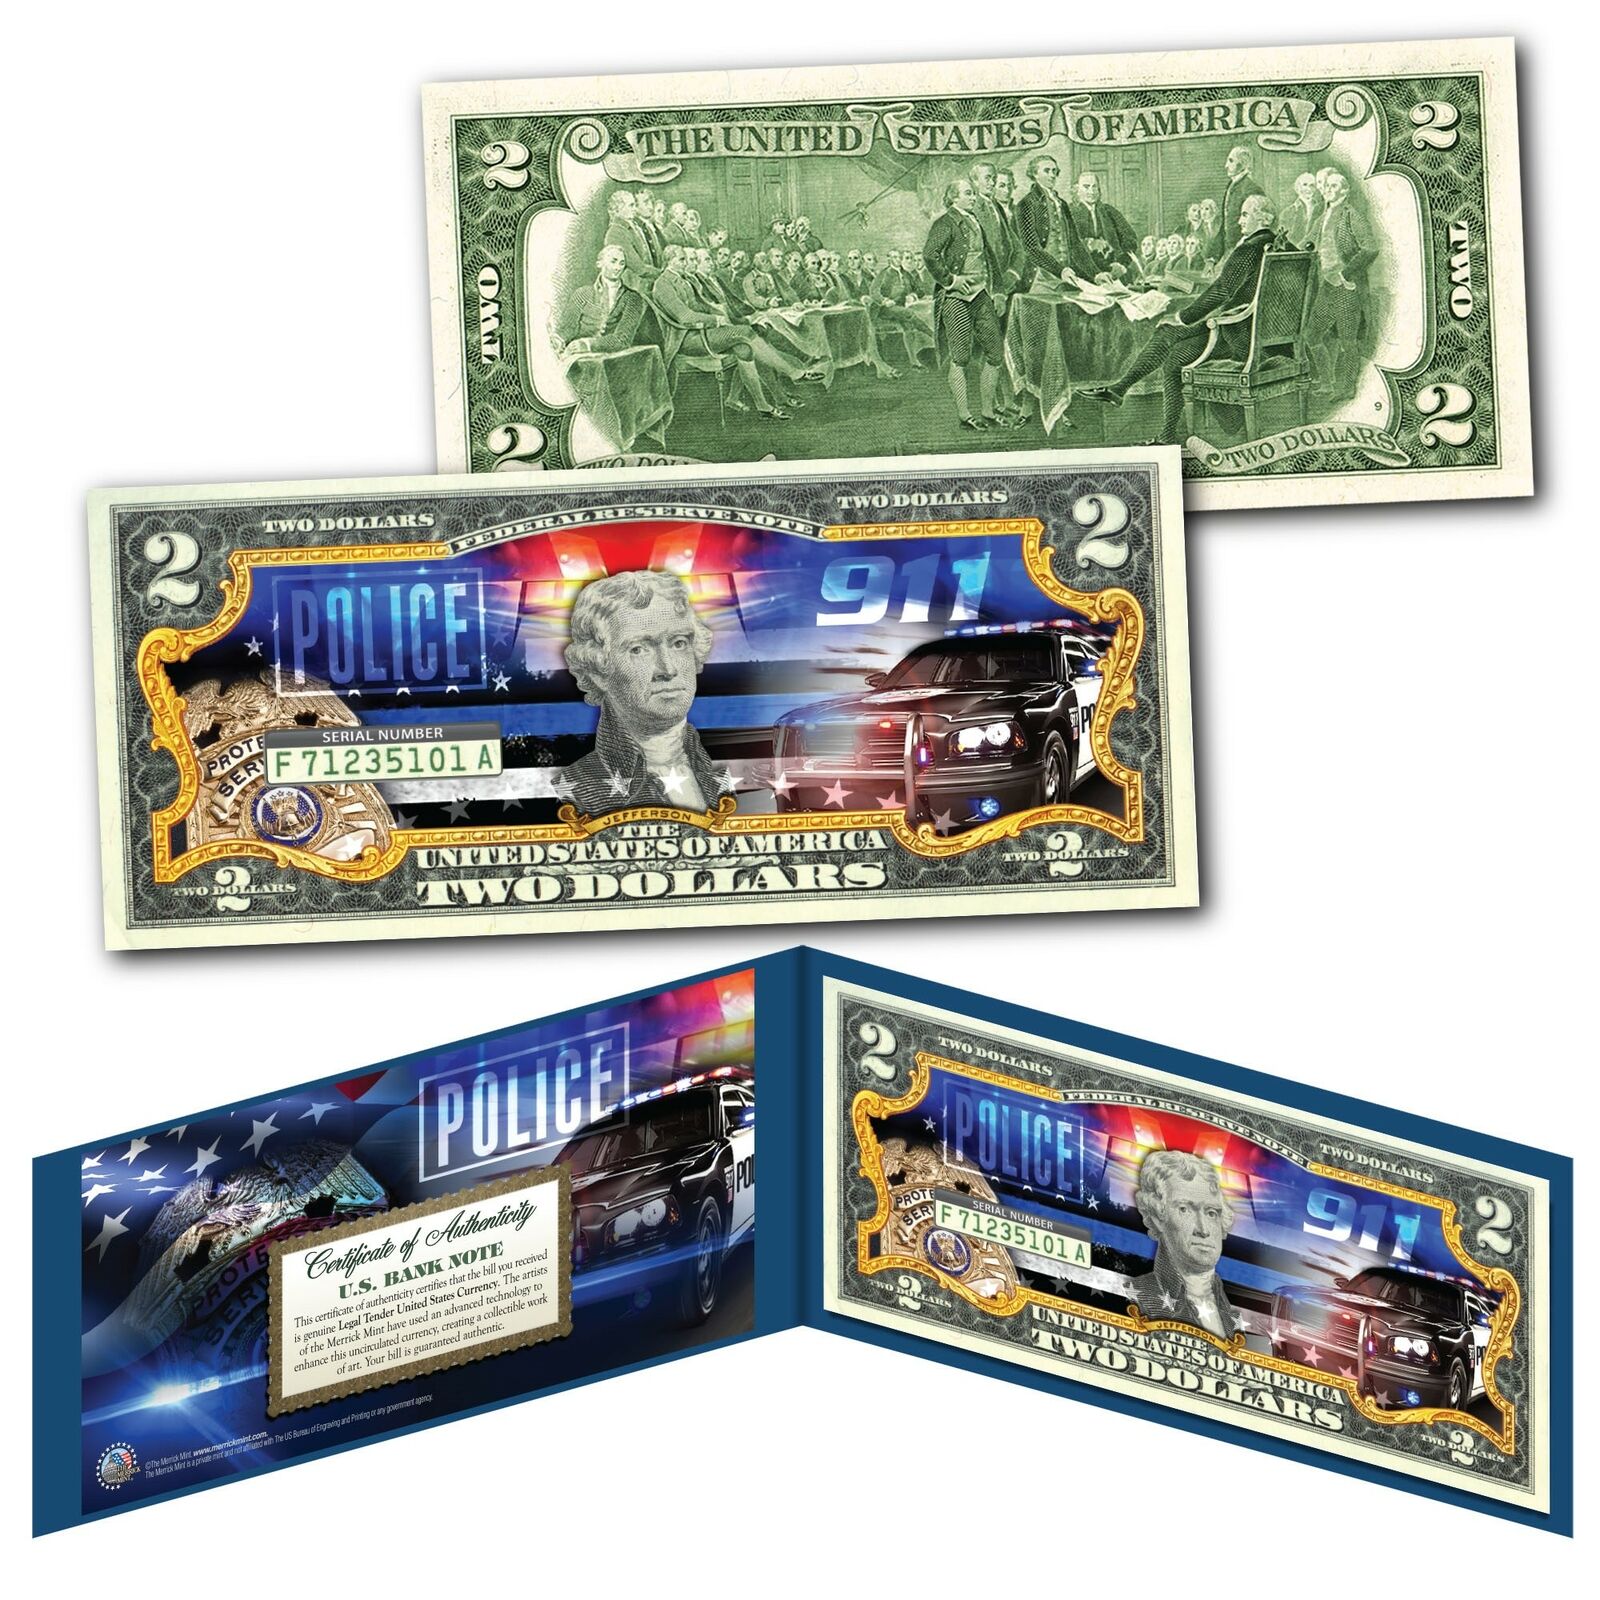 POLICE DEPARTMENT 911 Emergency Response Agency Genuine US $2 Bill - The Finest